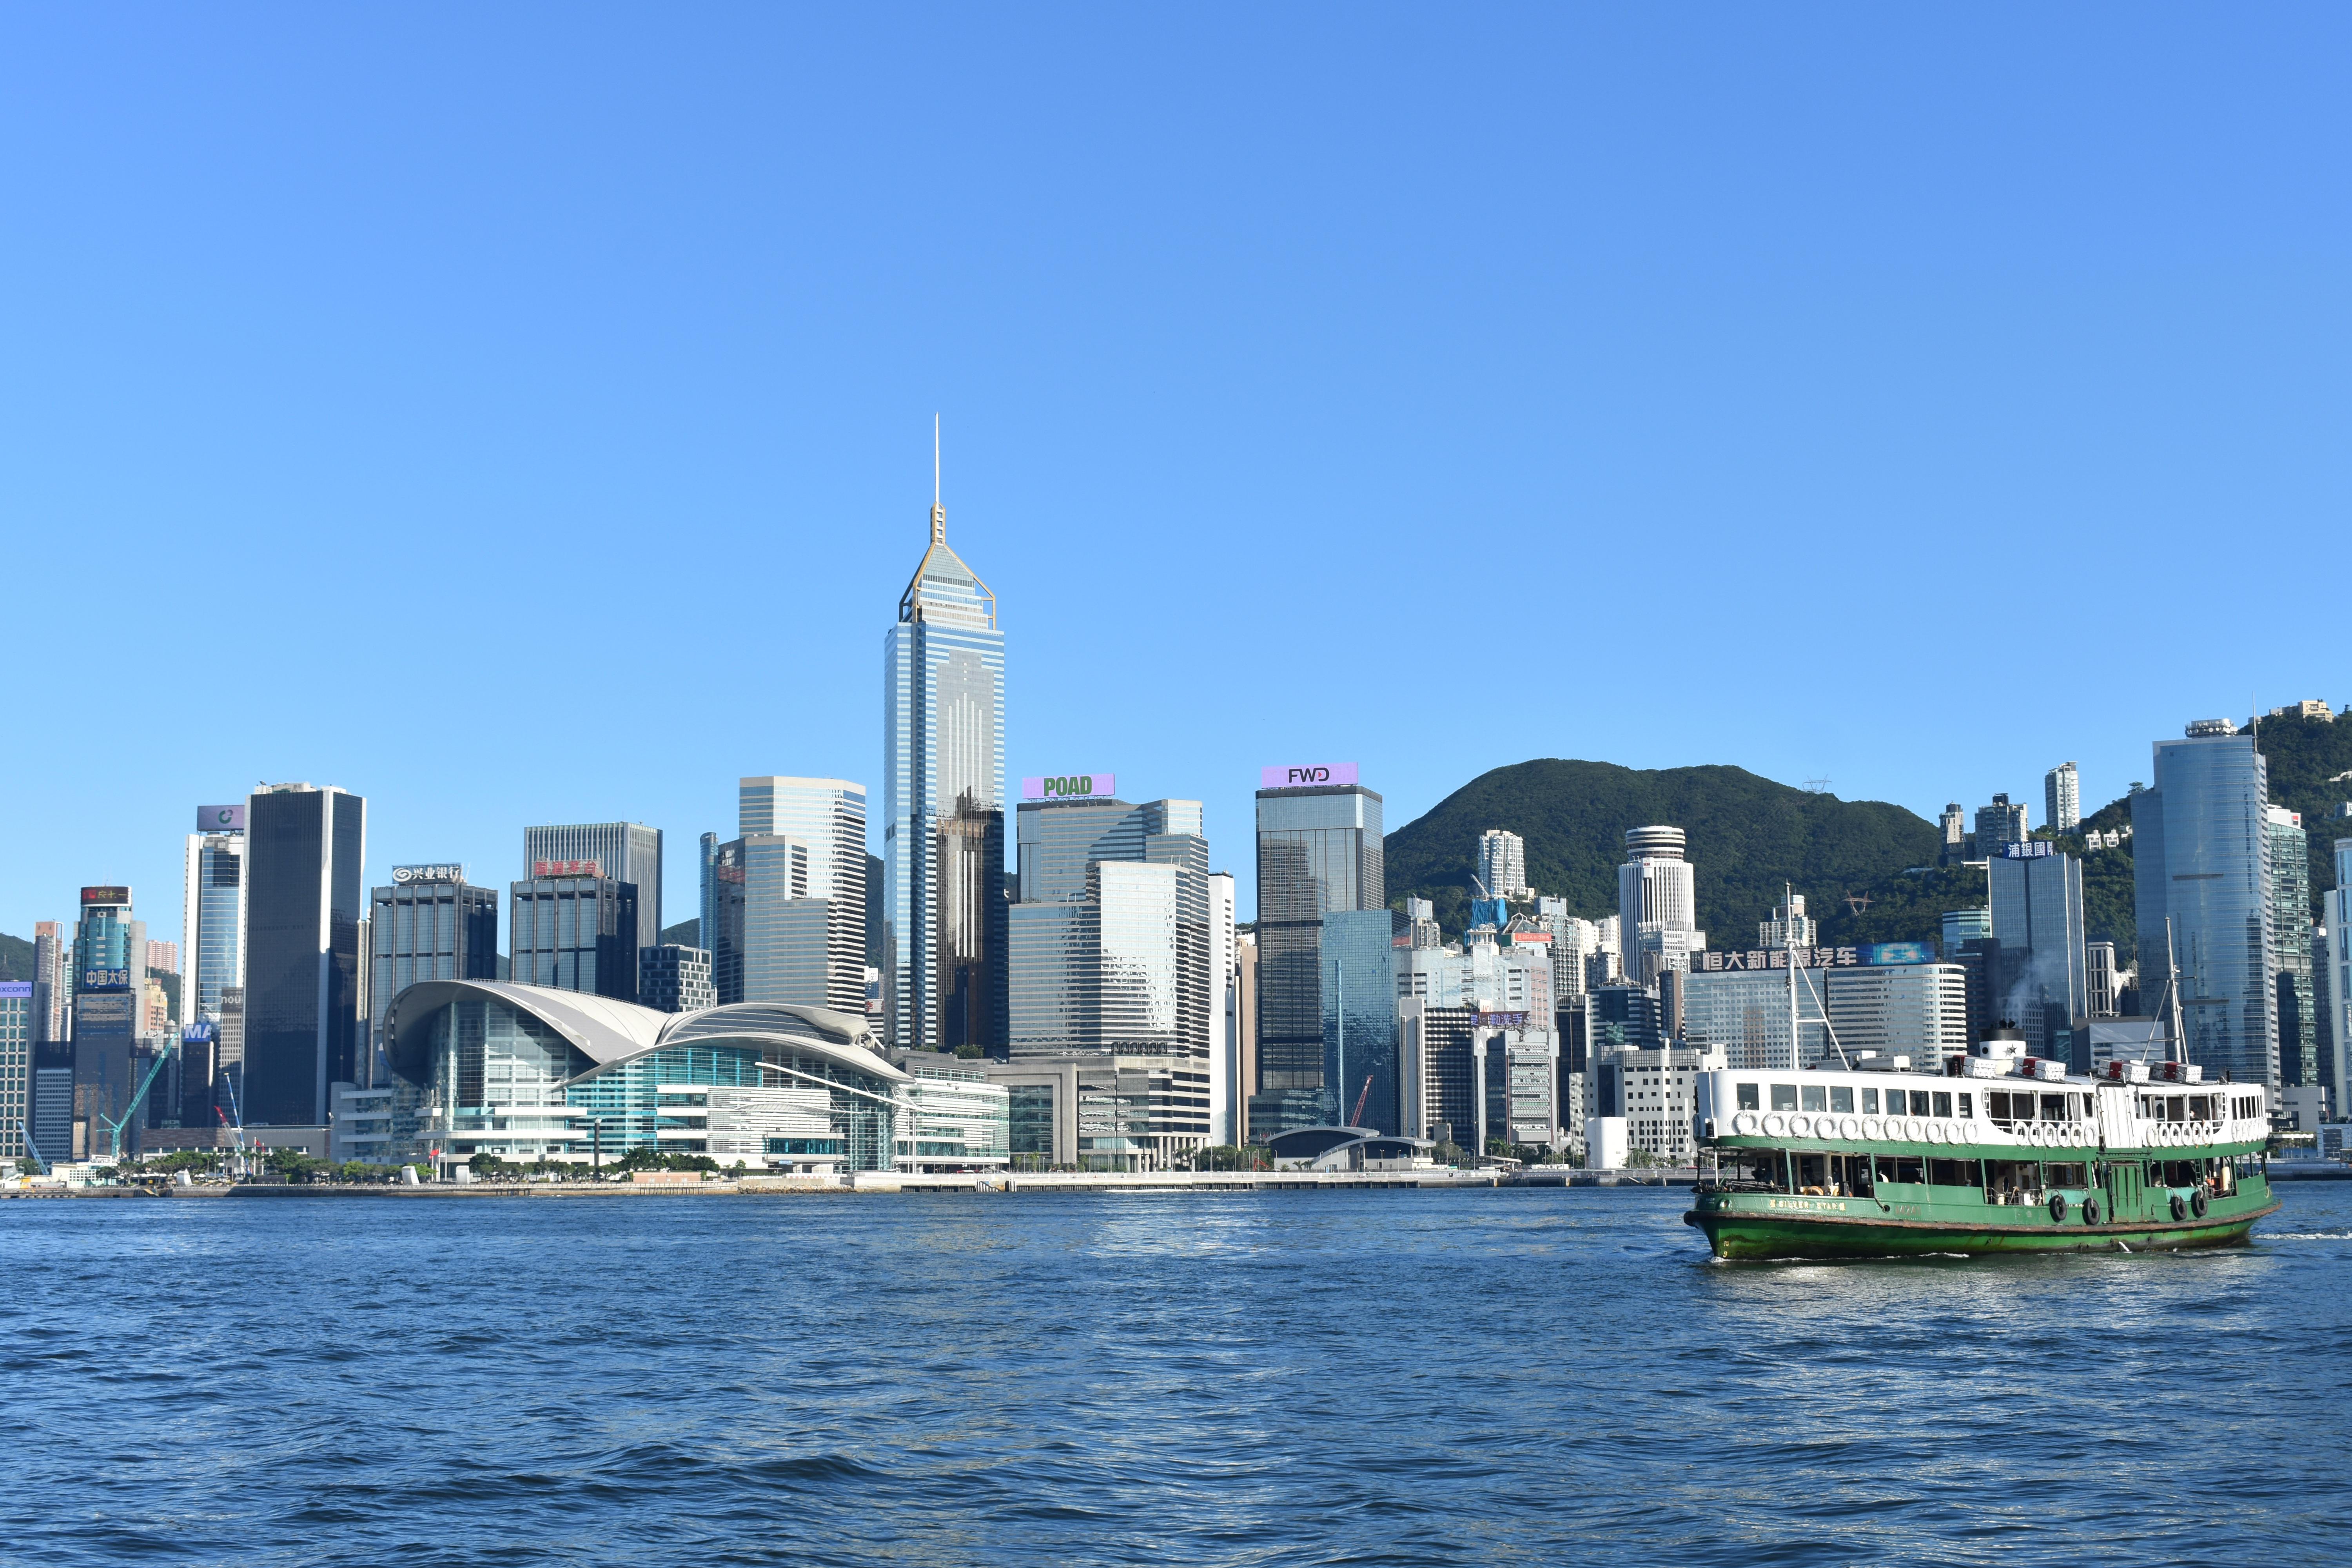 Hong Kong skyline with Star Ferry